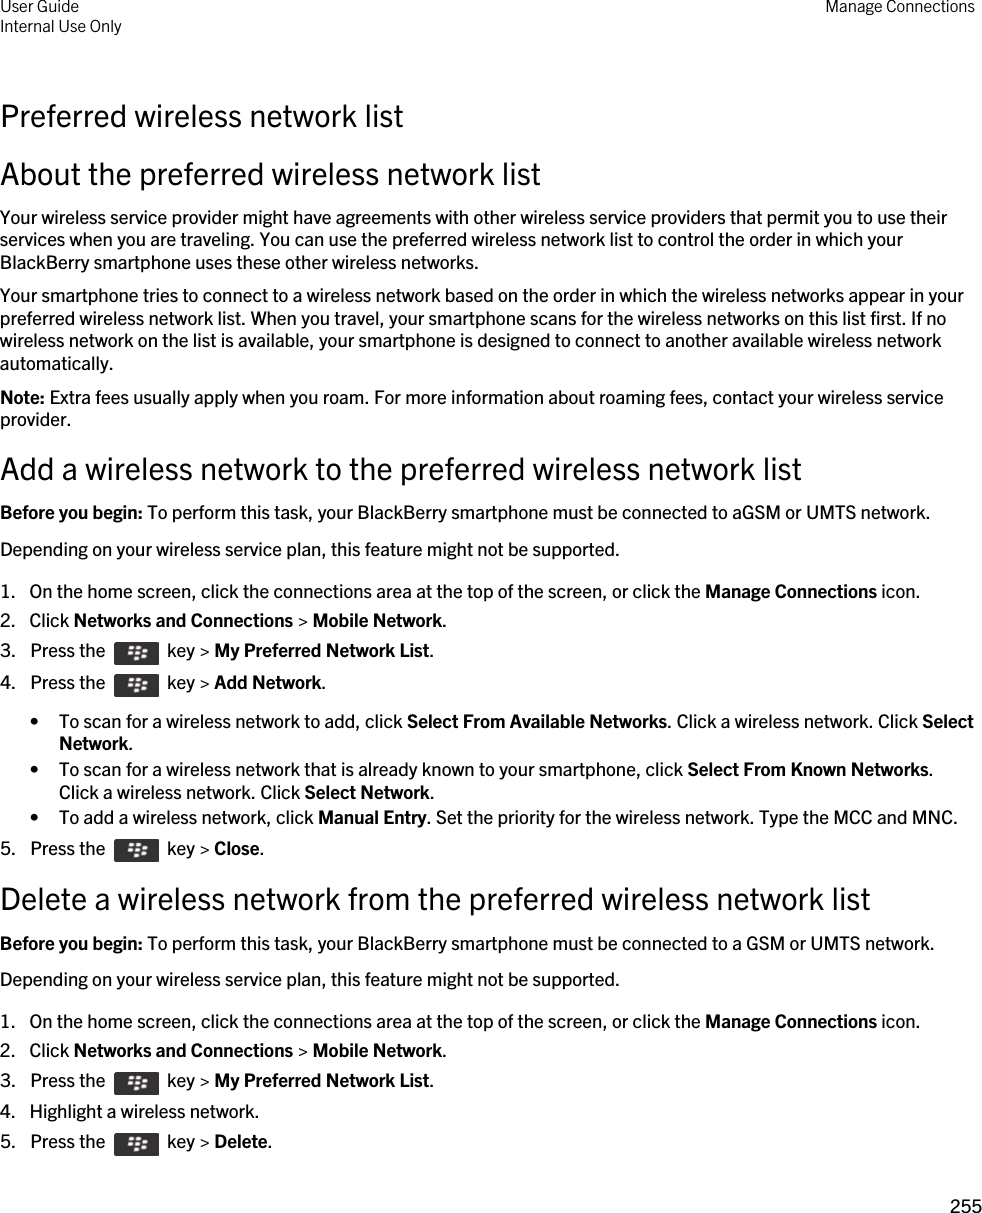 Preferred wireless network listAbout the preferred wireless network listYour wireless service provider might have agreements with other wireless service providers that permit you to use their services when you are traveling. You can use the preferred wireless network list to control the order in which your BlackBerry smartphone uses these other wireless networks.Your smartphone tries to connect to a wireless network based on the order in which the wireless networks appear in your preferred wireless network list. When you travel, your smartphone scans for the wireless networks on this list first. If no wireless network on the list is available, your smartphone is designed to connect to another available wireless network automatically.Note: Extra fees usually apply when you roam. For more information about roaming fees, contact your wireless service provider.Add a wireless network to the preferred wireless network listBefore you begin: To perform this task, your BlackBerry smartphone must be connected to aGSM or UMTS network.Depending on your wireless service plan, this feature might not be supported.1. On the home screen, click the connections area at the top of the screen, or click the Manage Connections icon.2. Click Networks and Connections &gt; Mobile Network.3.  Press the    key &gt; My Preferred Network List. 4.  Press the    key &gt; Add Network. • To scan for a wireless network to add, click Select From Available Networks. Click a wireless network. Click Select Network.• To scan for a wireless network that is already known to your smartphone, click Select From Known Networks. Click a wireless network. Click Select Network.• To add a wireless network, click Manual Entry. Set the priority for the wireless network. Type the MCC and MNC.5.  Press the    key &gt; Close.Delete a wireless network from the preferred wireless network listBefore you begin: To perform this task, your BlackBerry smartphone must be connected to a GSM or UMTS network.Depending on your wireless service plan, this feature might not be supported.1. On the home screen, click the connections area at the top of the screen, or click the Manage Connections icon.2. Click Networks and Connections &gt; Mobile Network.3.  Press the    key &gt; My Preferred Network List. 4. Highlight a wireless network.5.  Press the    key &gt; Delete. User GuideInternal Use Only Manage Connections255 